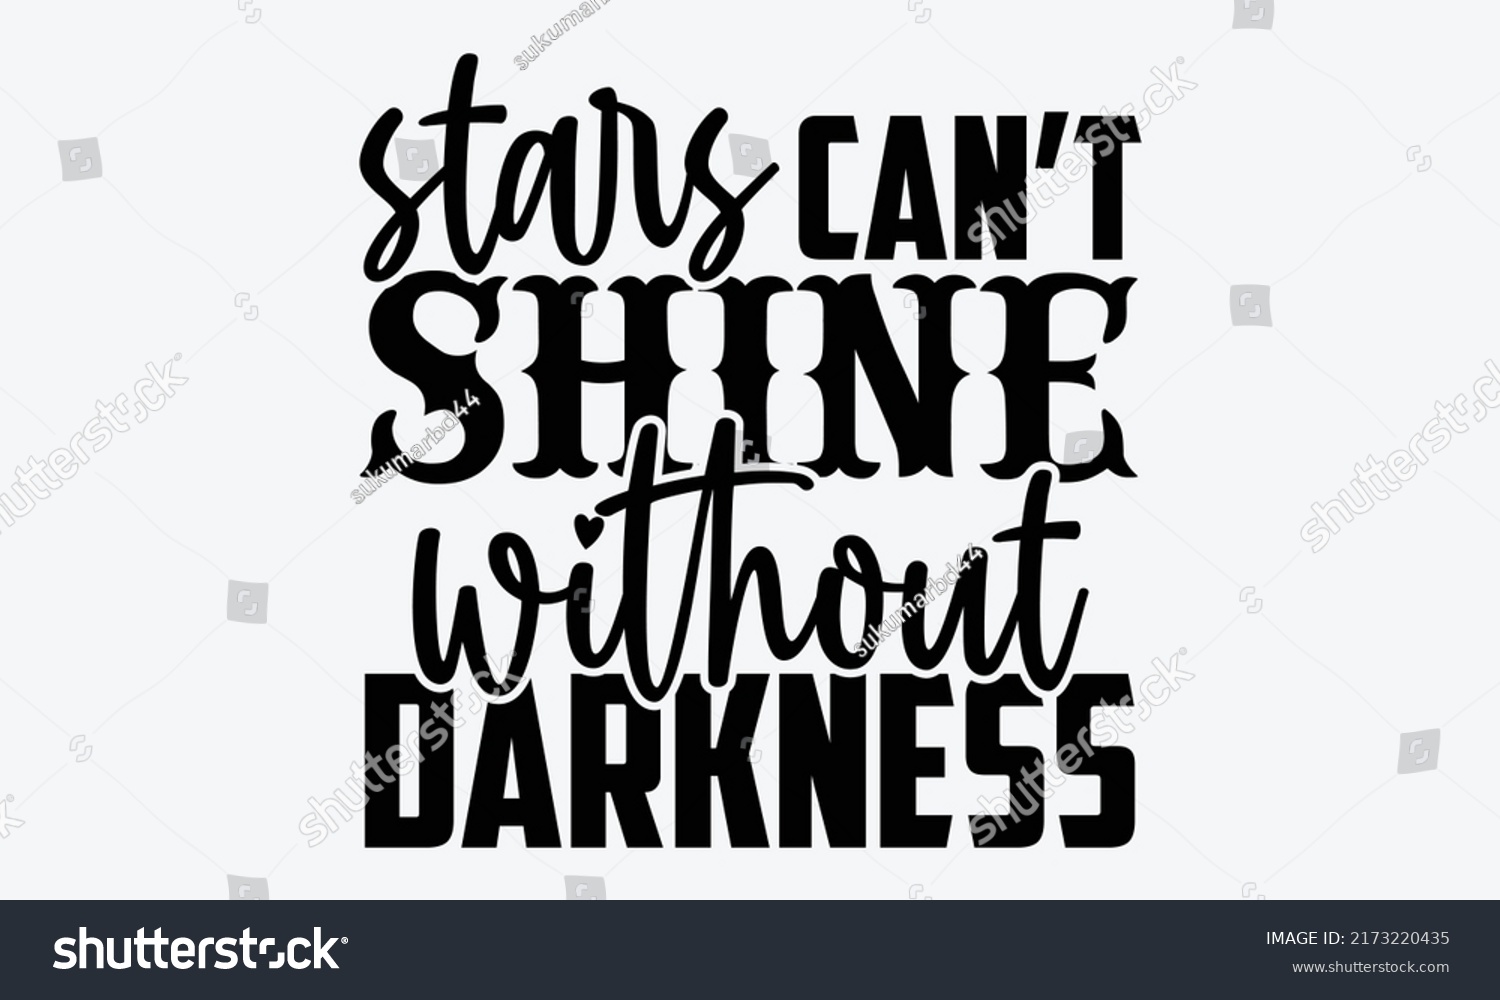 SVG of Stars can’t shine without darkness - Mental Health t shirts design, Hand drawn lettering phrase, Calligraphy t shirt design, Isolated on white background, svg Files for Cutting Cricut and Silhouette,  svg